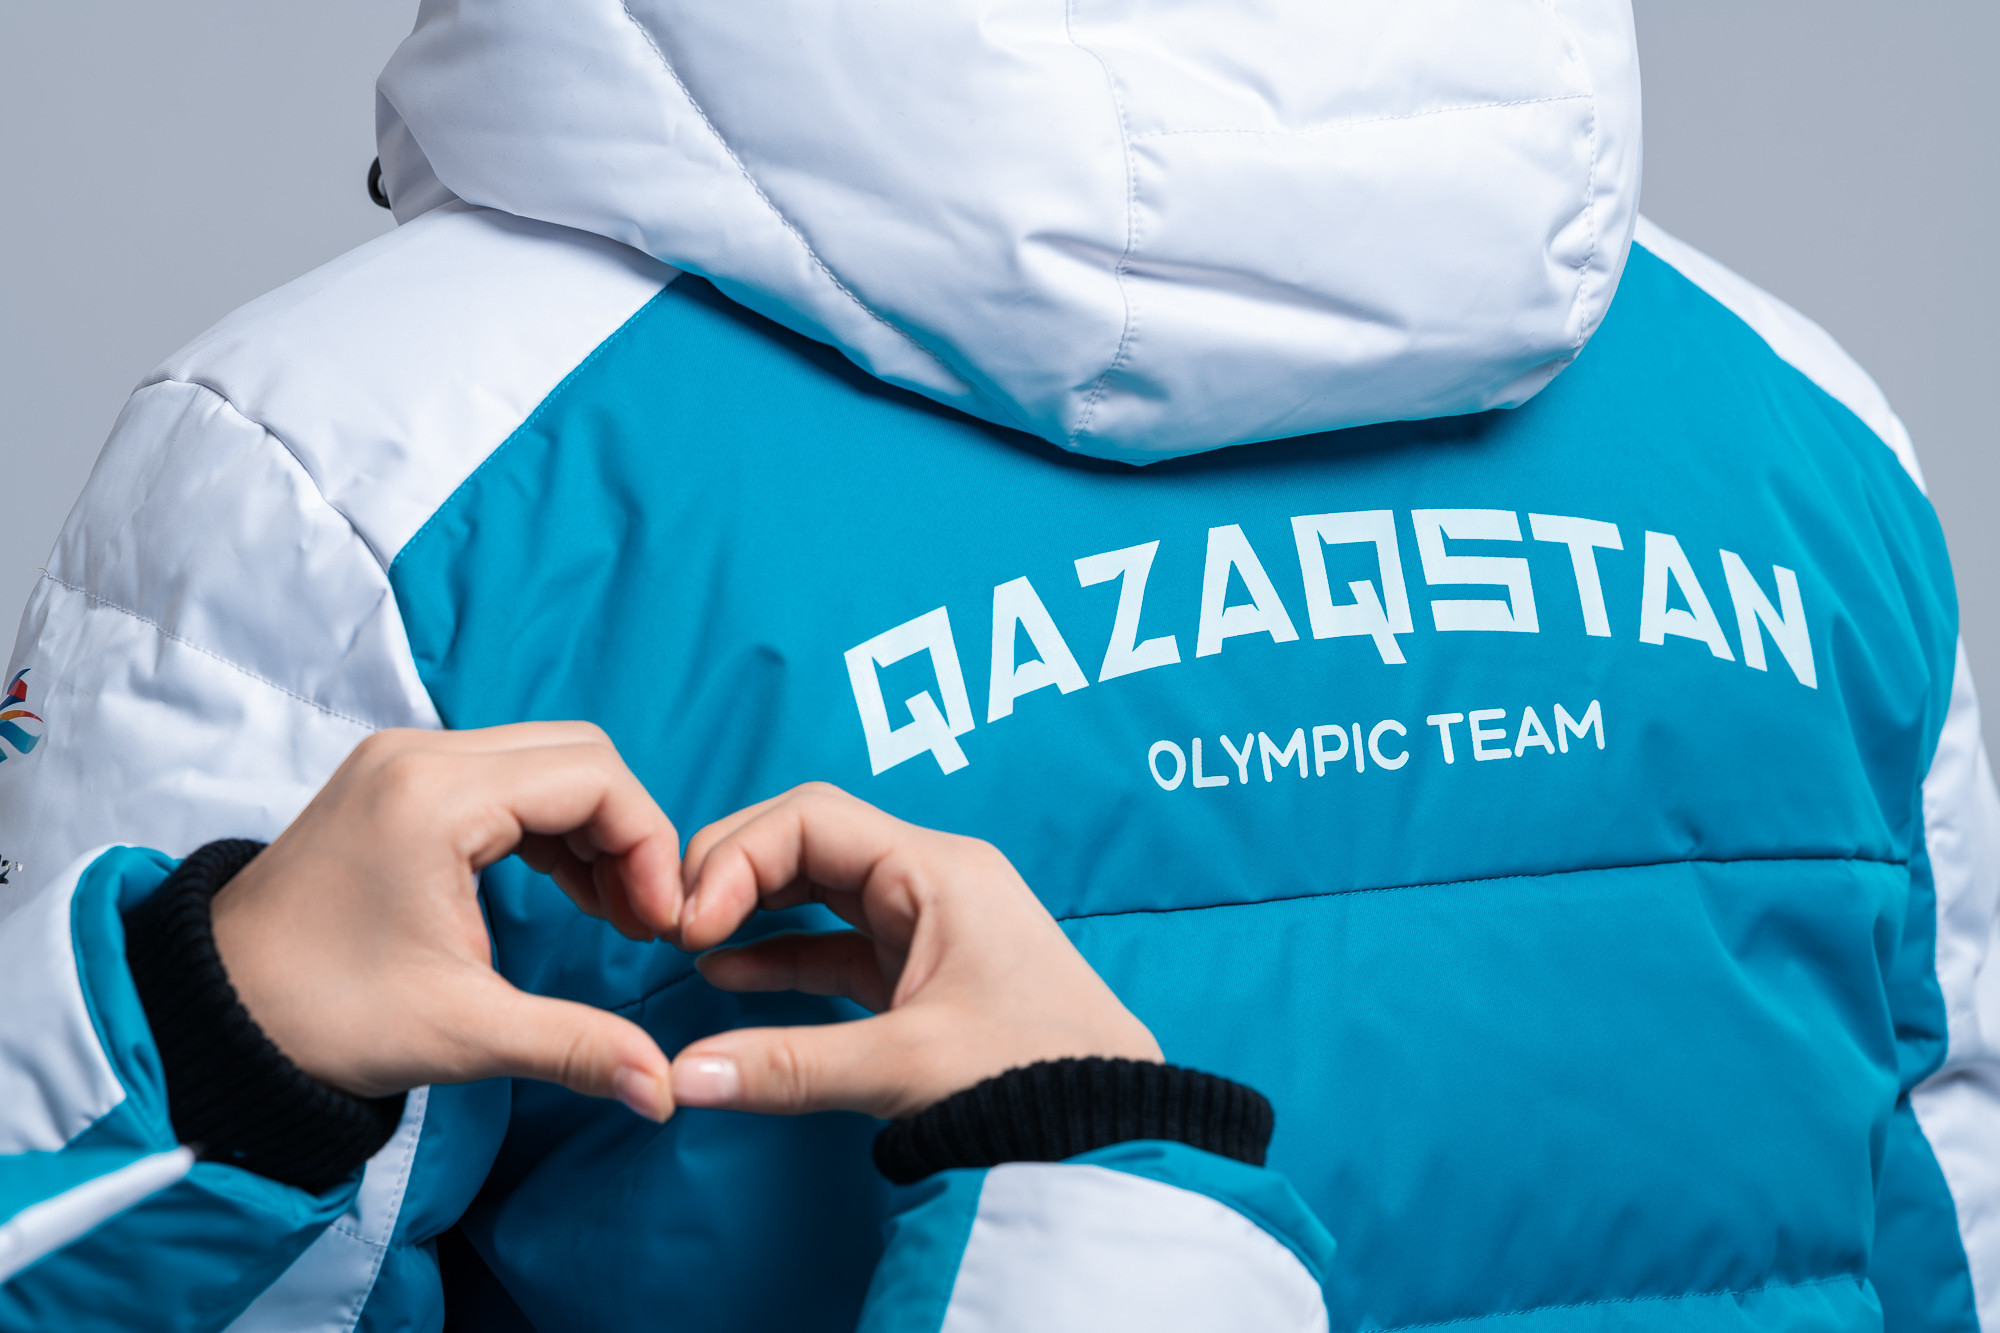 Qazagstan will be used instead of Kazakhstan on Kazakh athletes' outfits at Beijing 2022 ©NOC of Kazakhstan